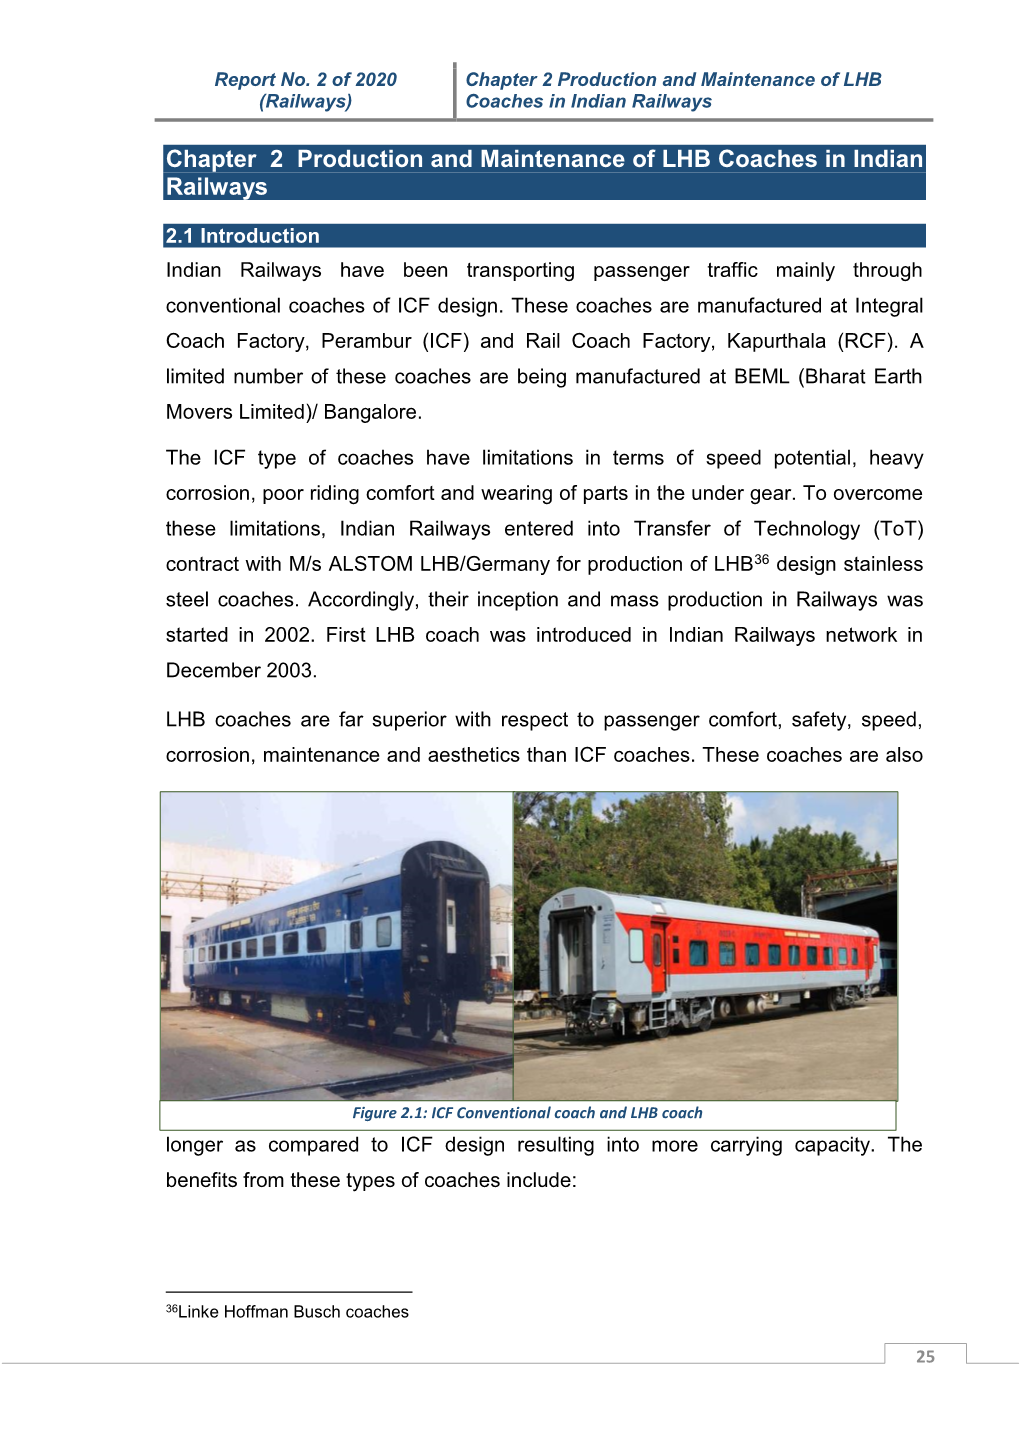 Chapter 2 Production and Maintenance of LHB Coaches in Indian Railways